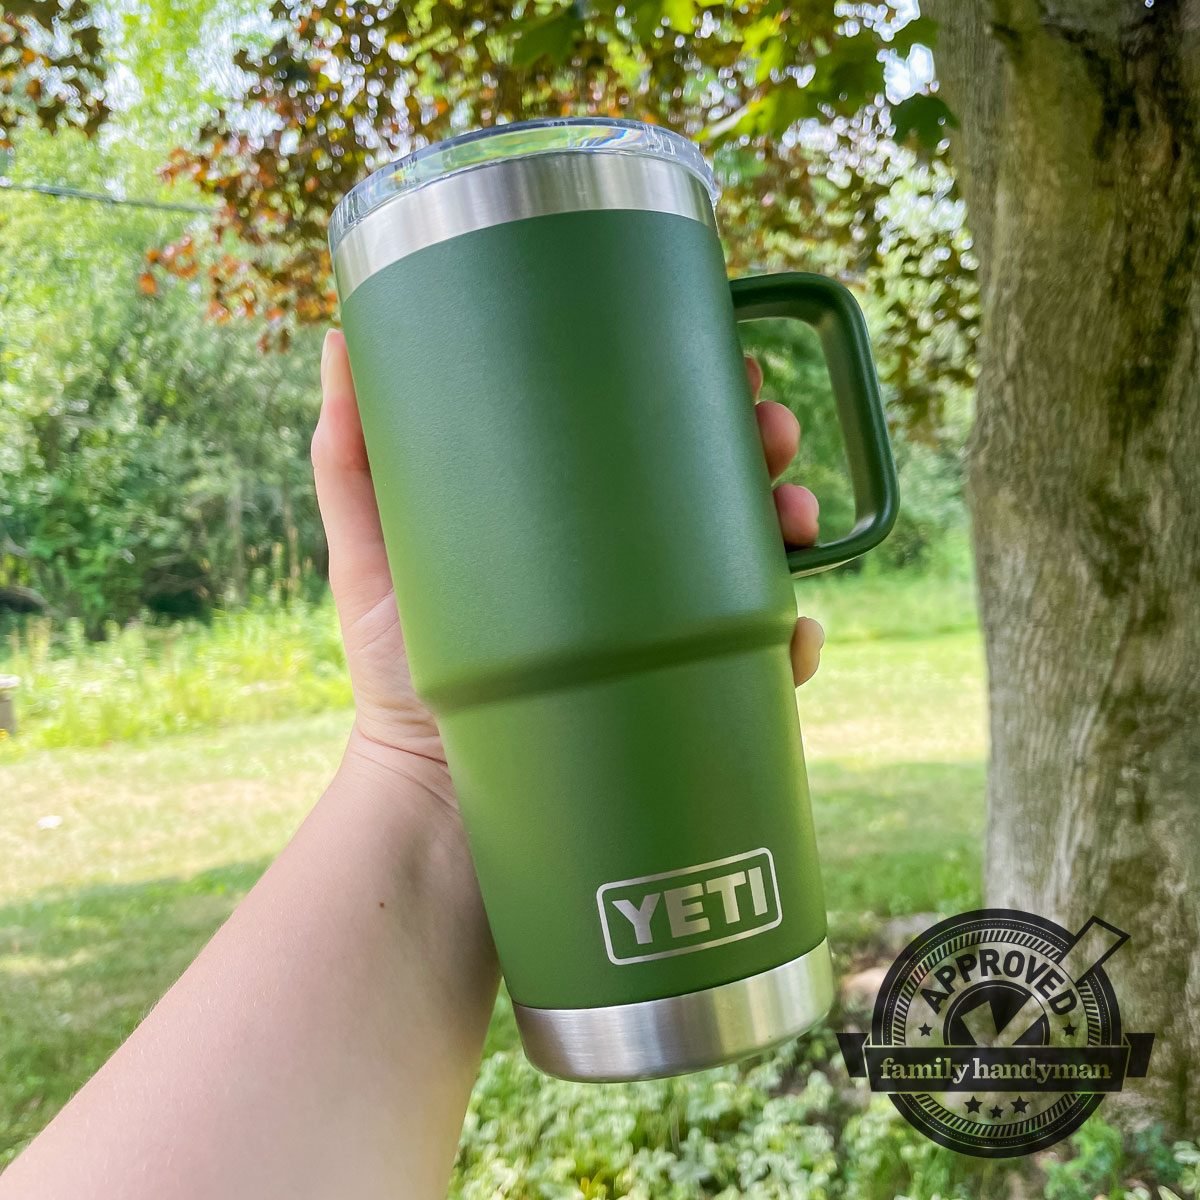 The 9 Best Yeti Products Our Editors Tested and Loved